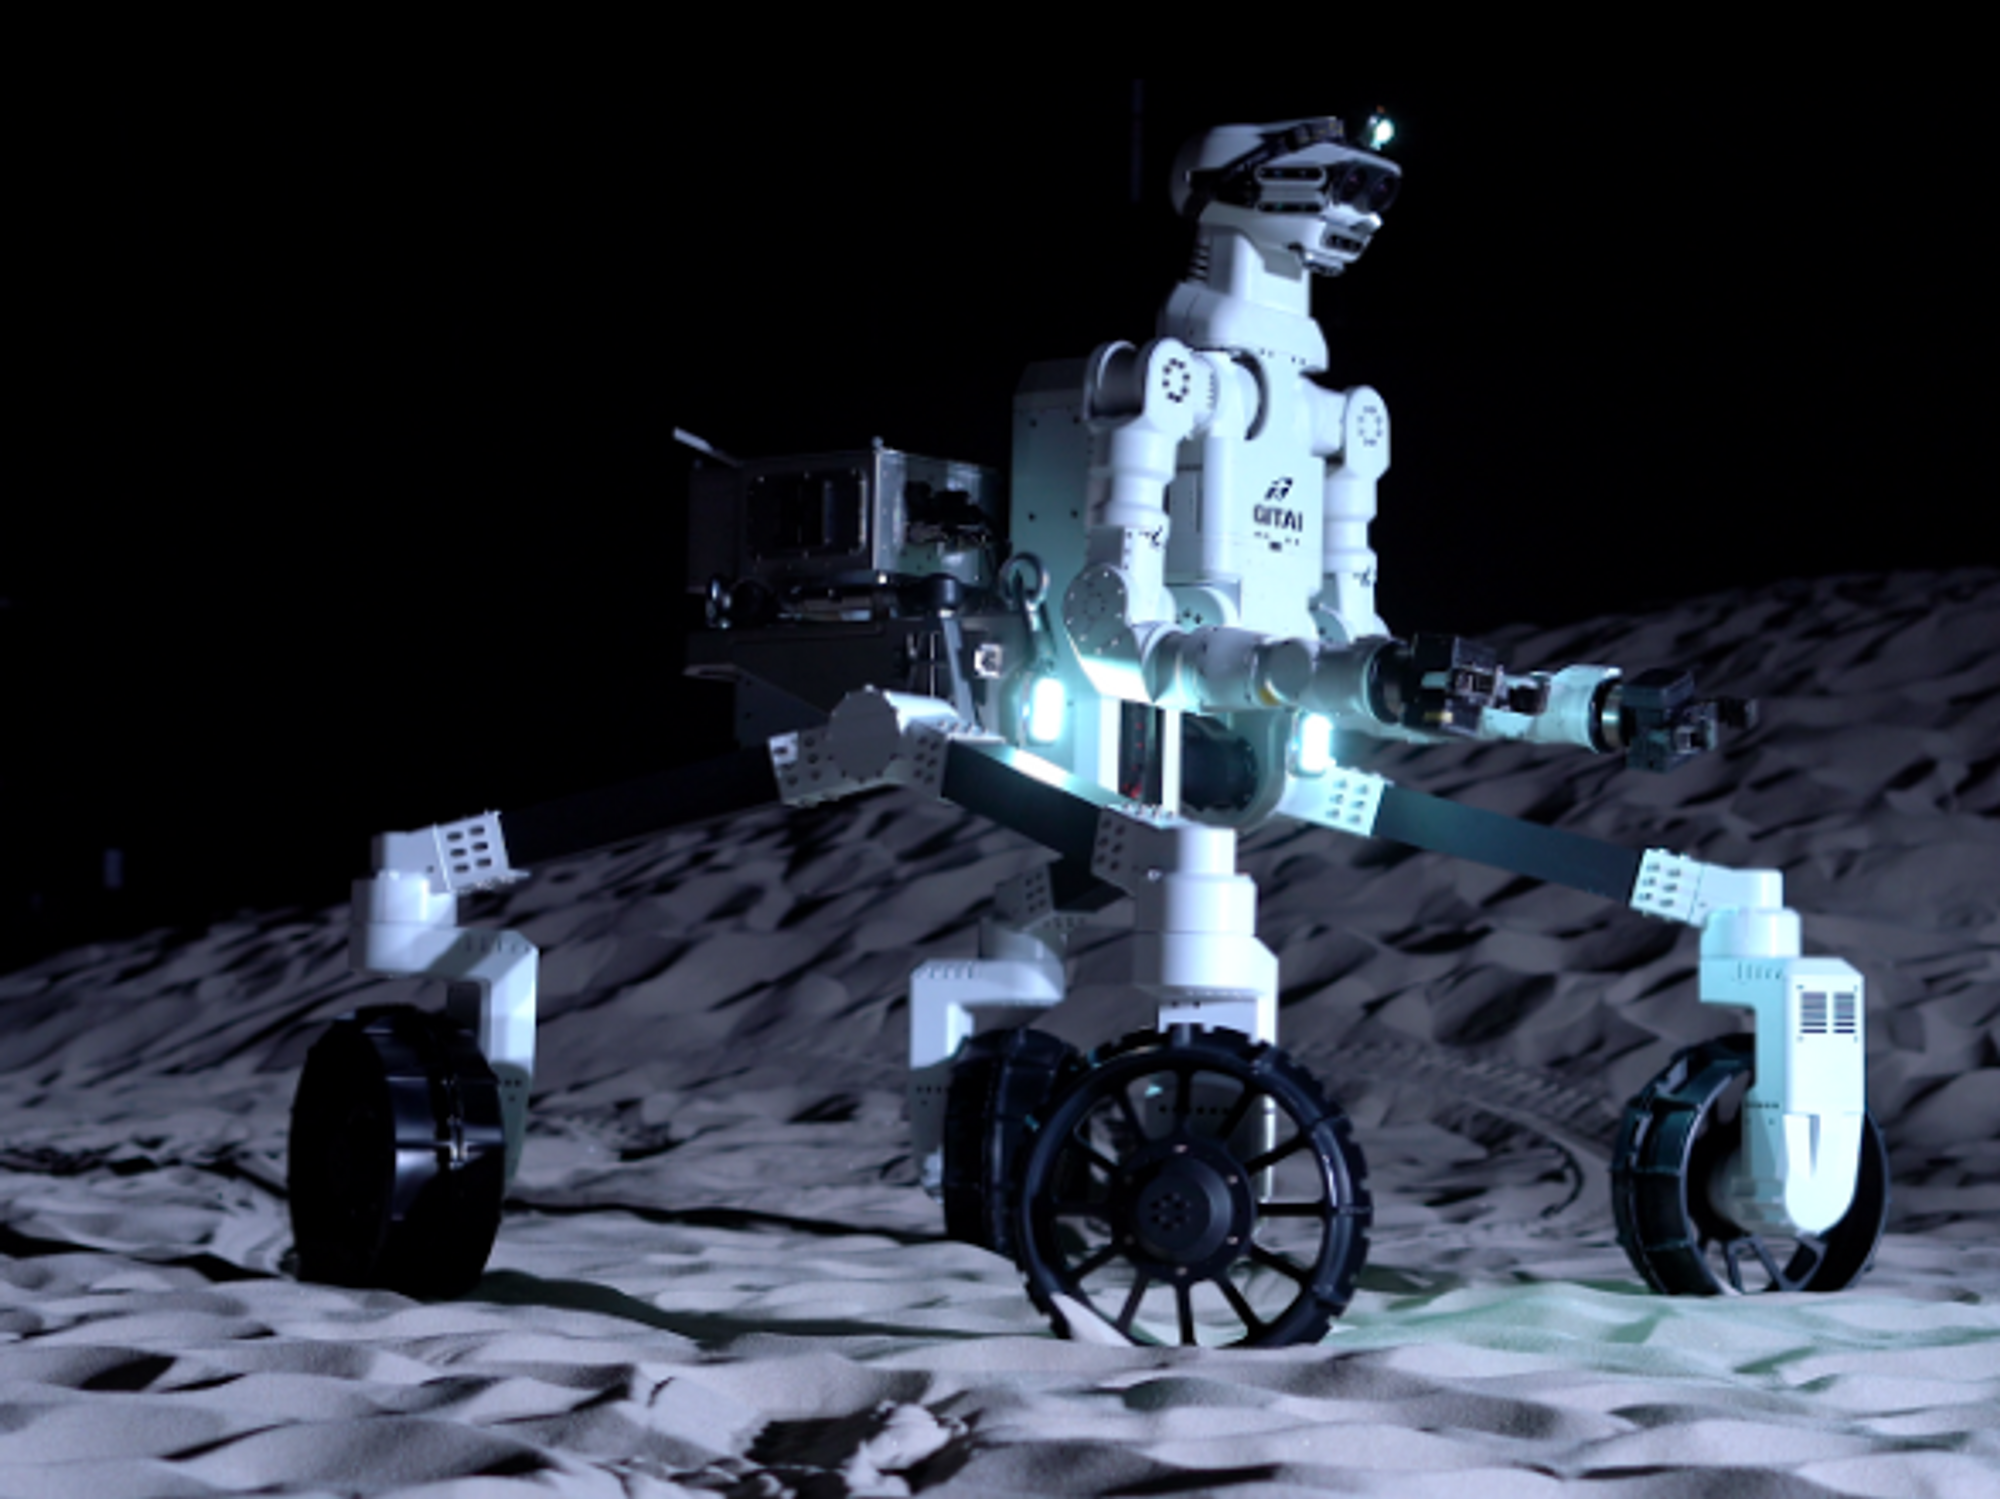 Gitai Secures $30 Million in Funding to Continue Space Robotics Developments